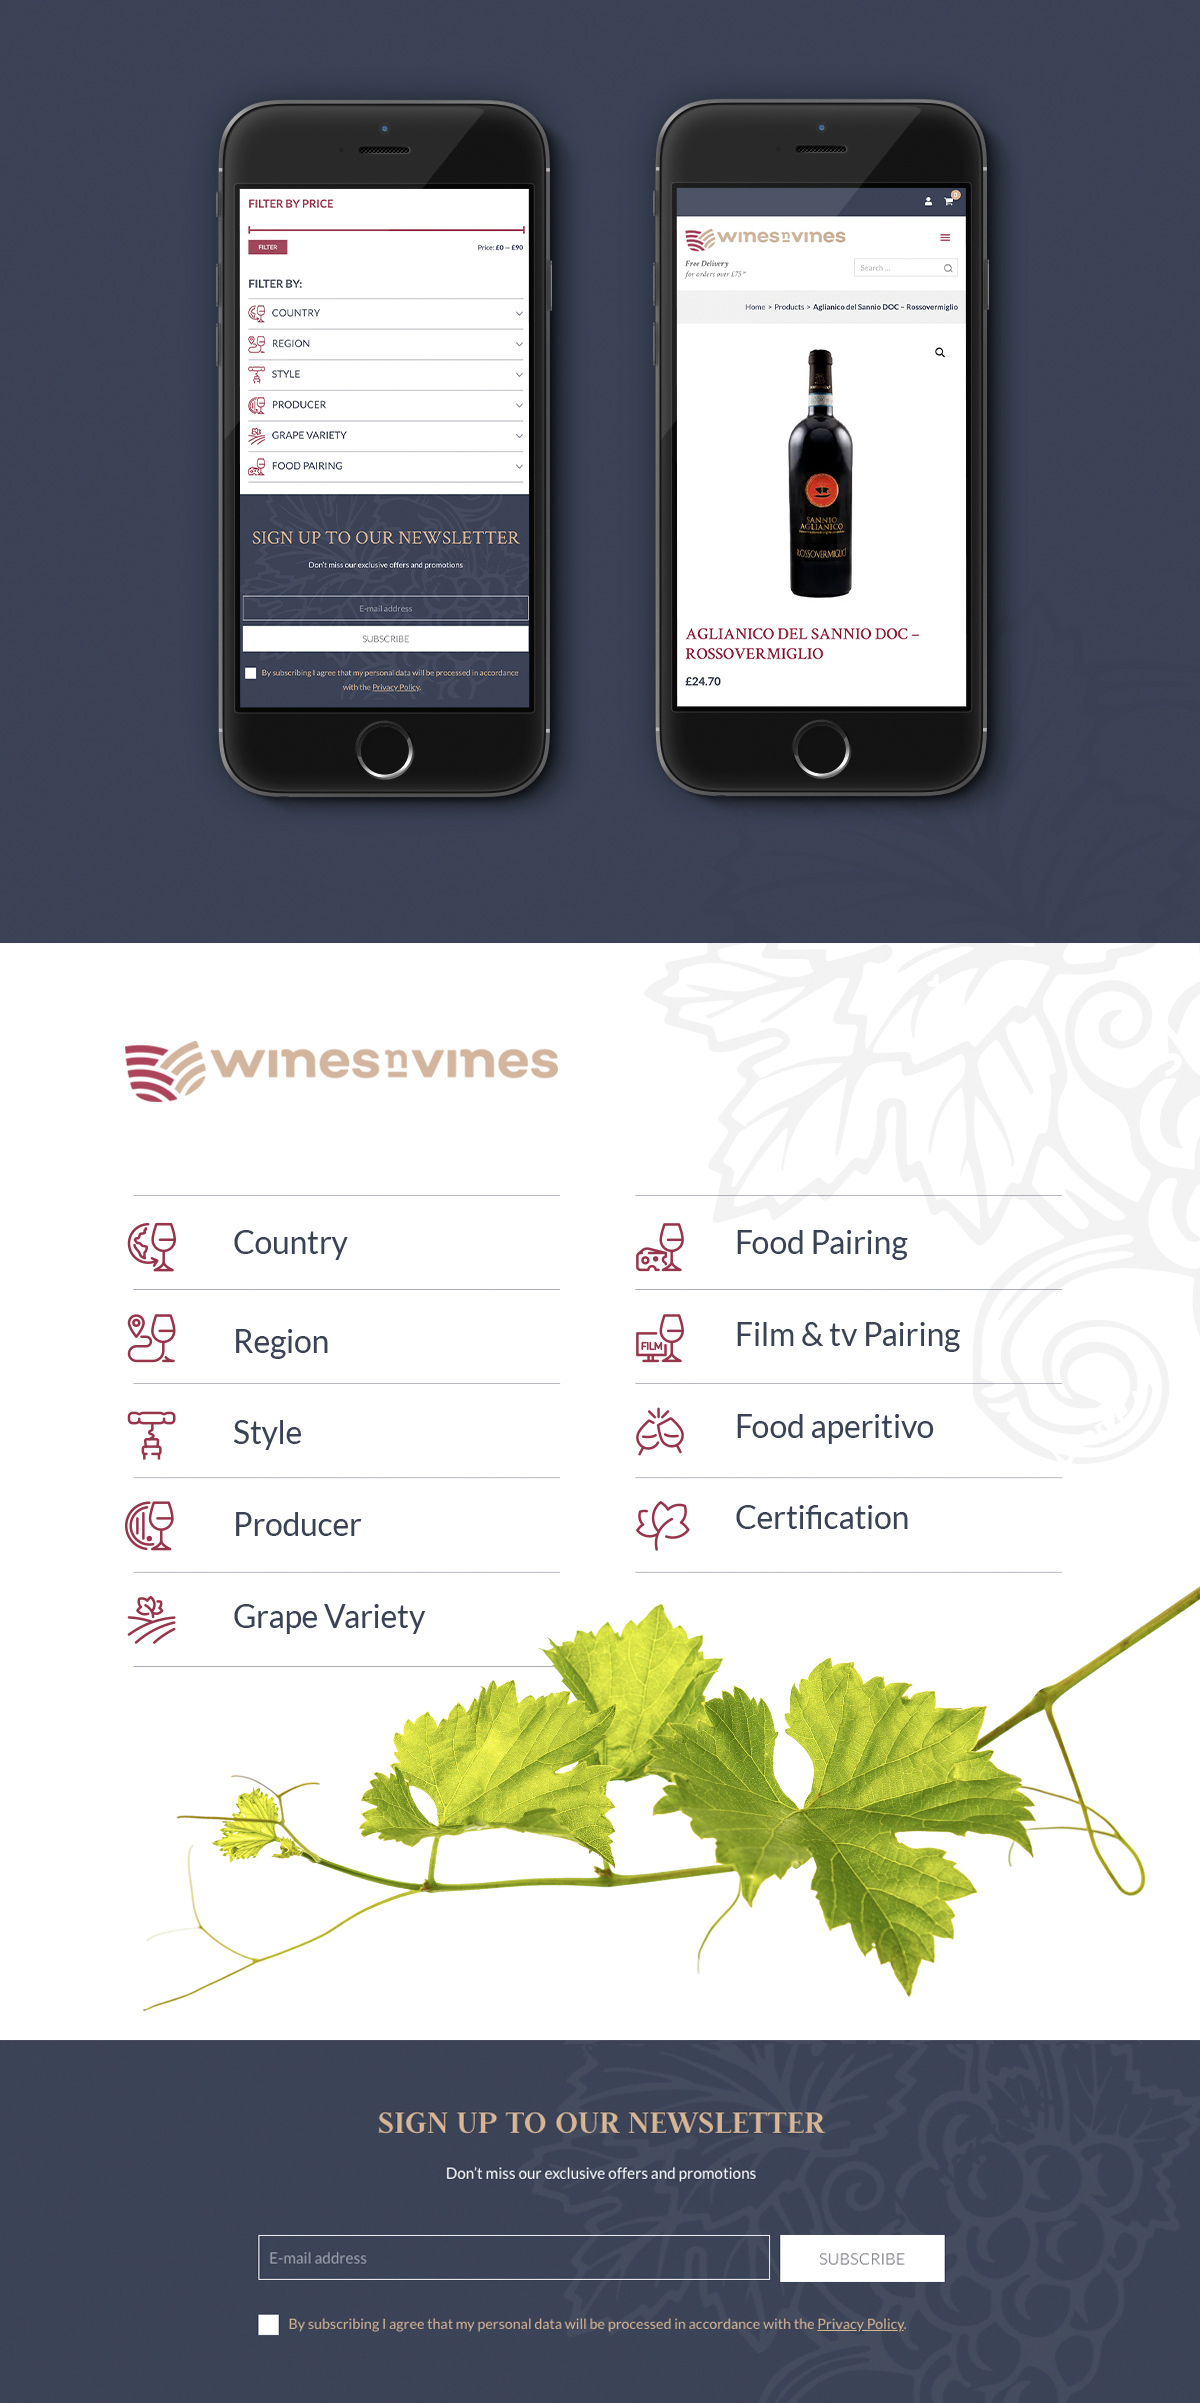 WINESnVINES – Brand Identity and Website by Nicola Sancisi - Creative Work - $i